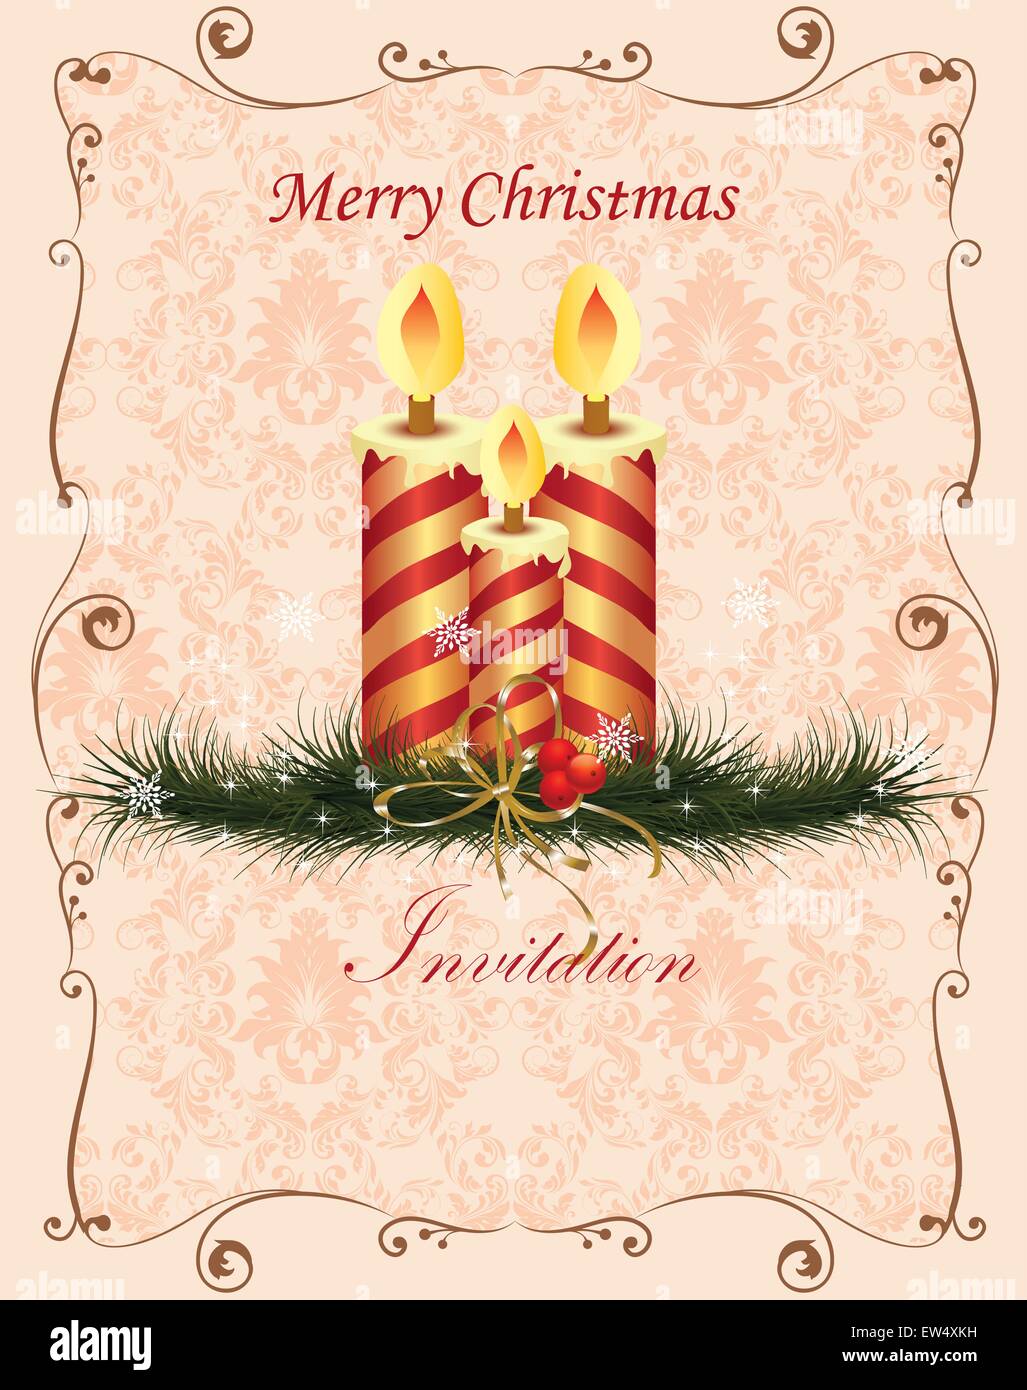 Vintage Christmas card with ornate elegant retro abstract floral design, red and gold striped candles on light orange pink flowers and leaves on beige background with cherries ribbon pine needles frame border and text label. Vector illustration. Stock Vector